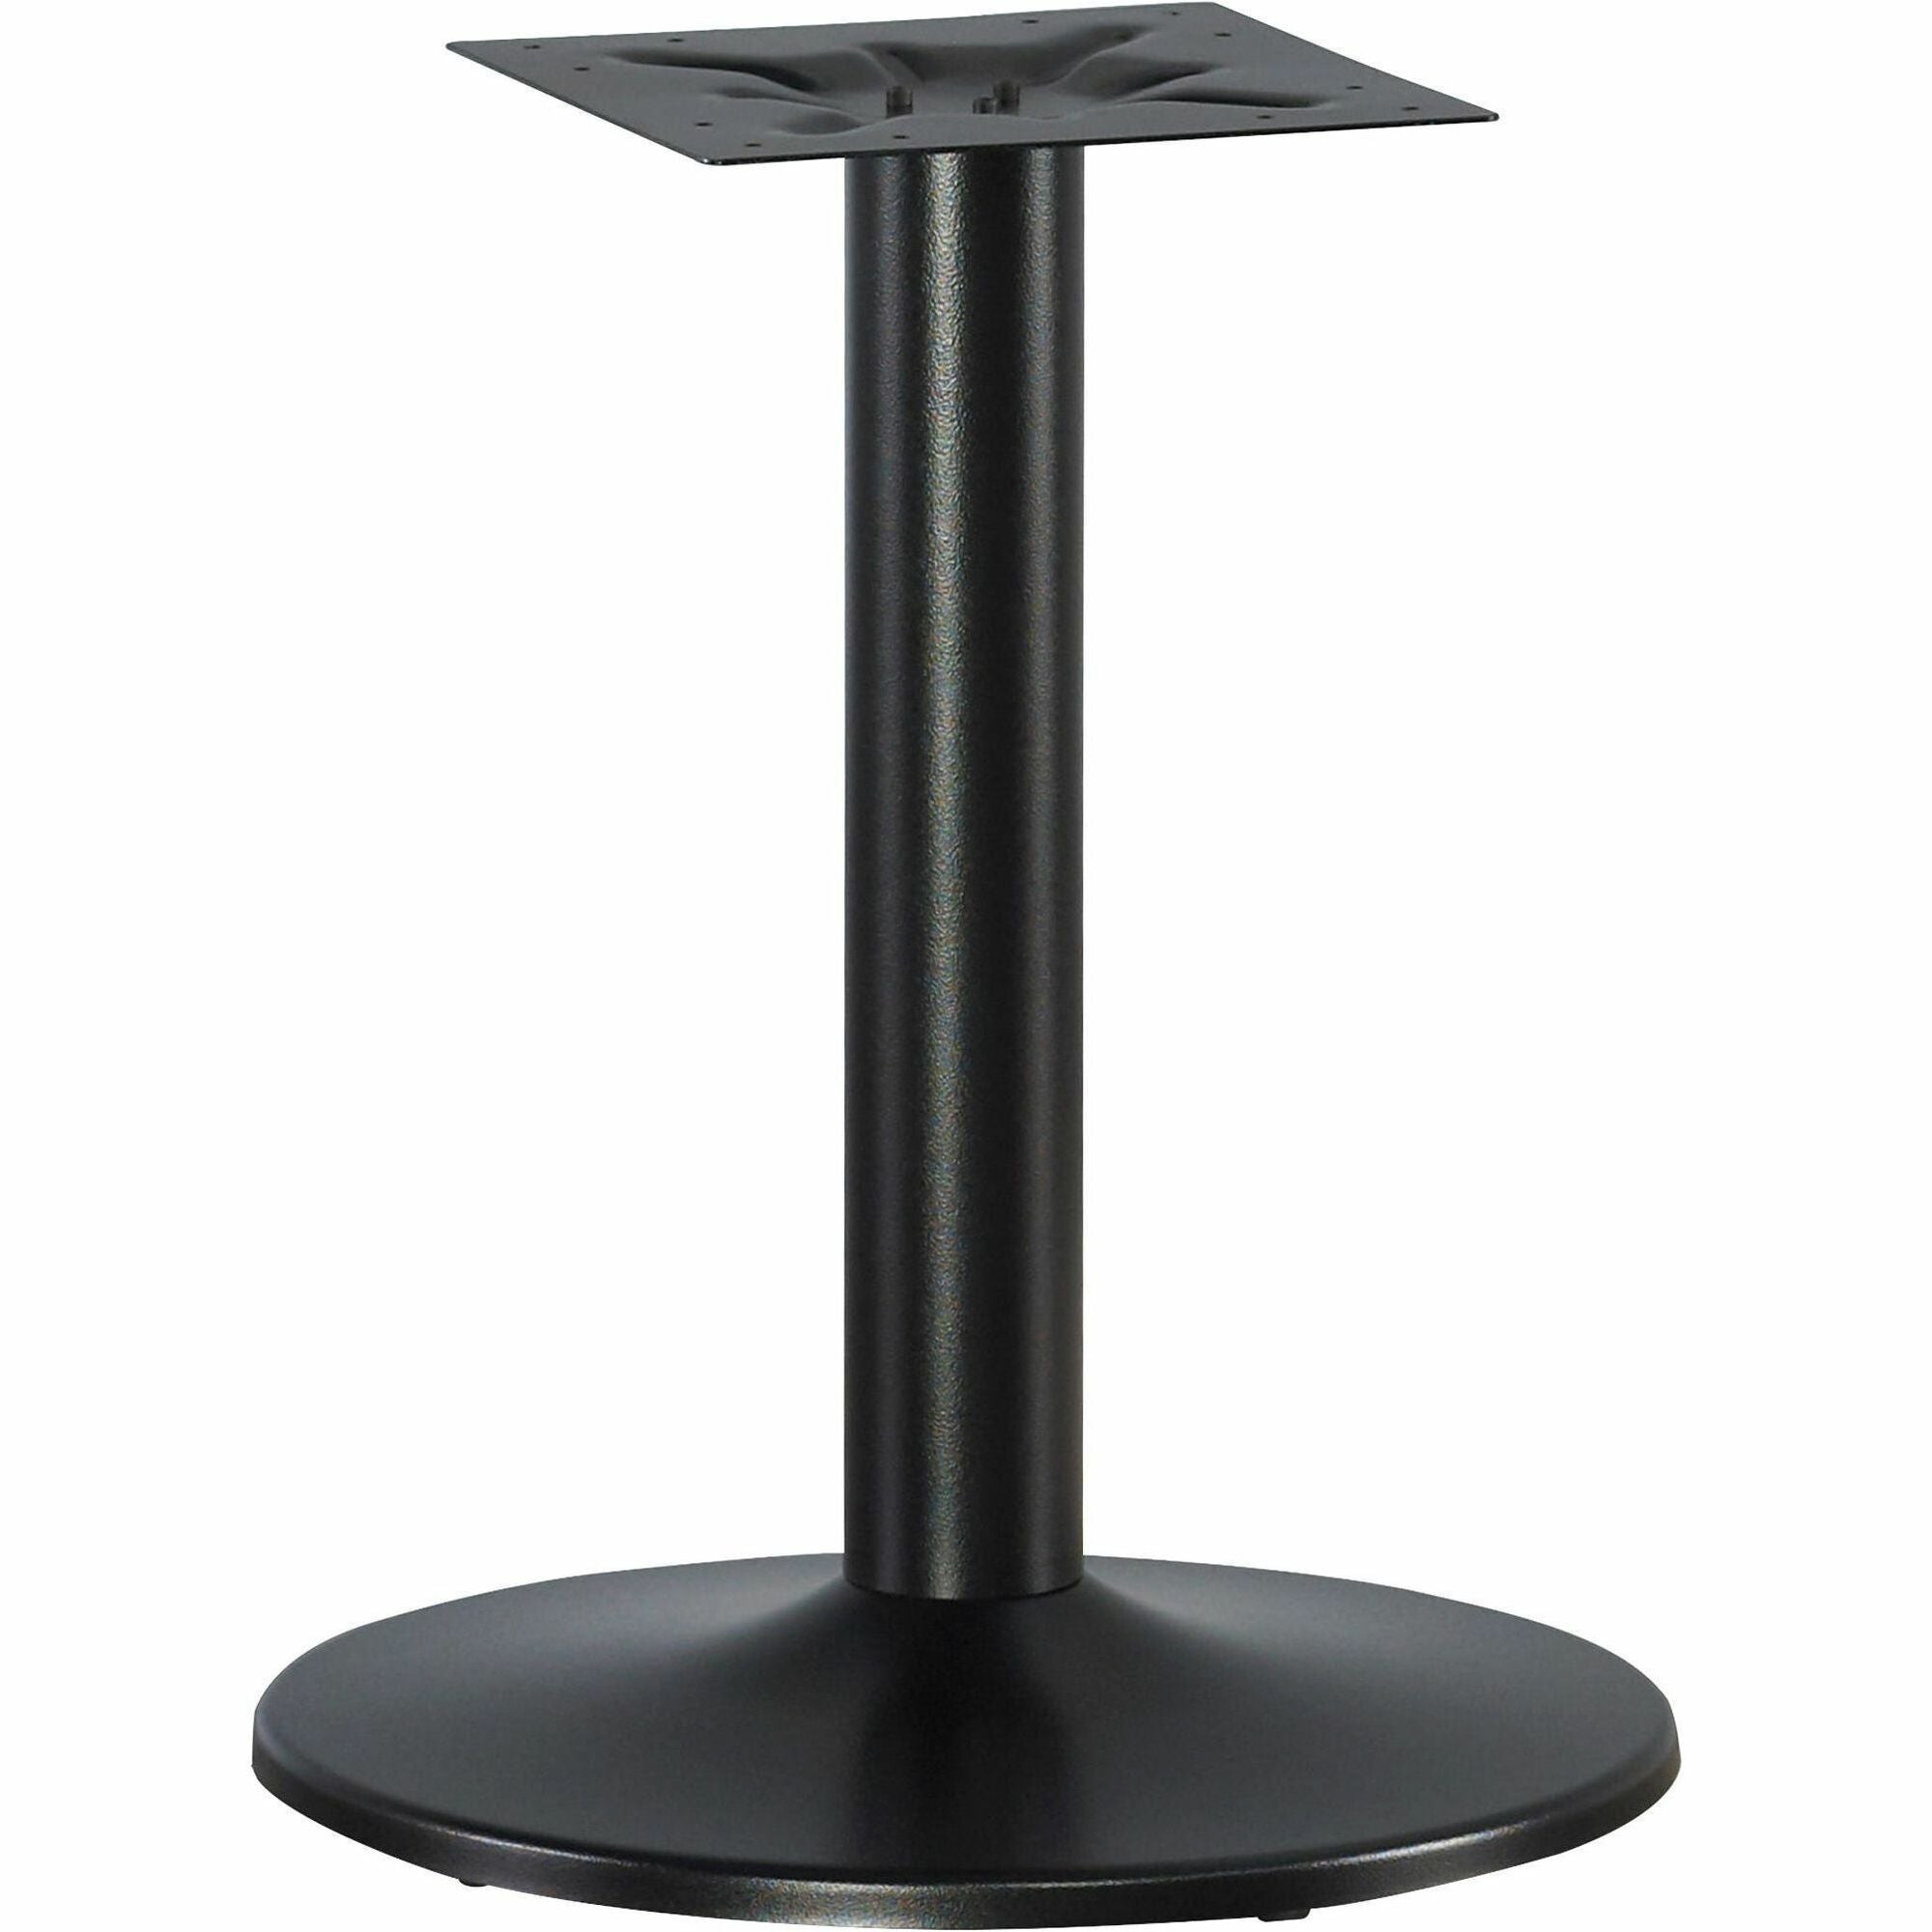 Lorell Essentials Round Conference Table Steel Base - Round Base - 28.50" Height x 23.63" Width x 23.63" Depth - Assembly Required - Black - 1 Each - 